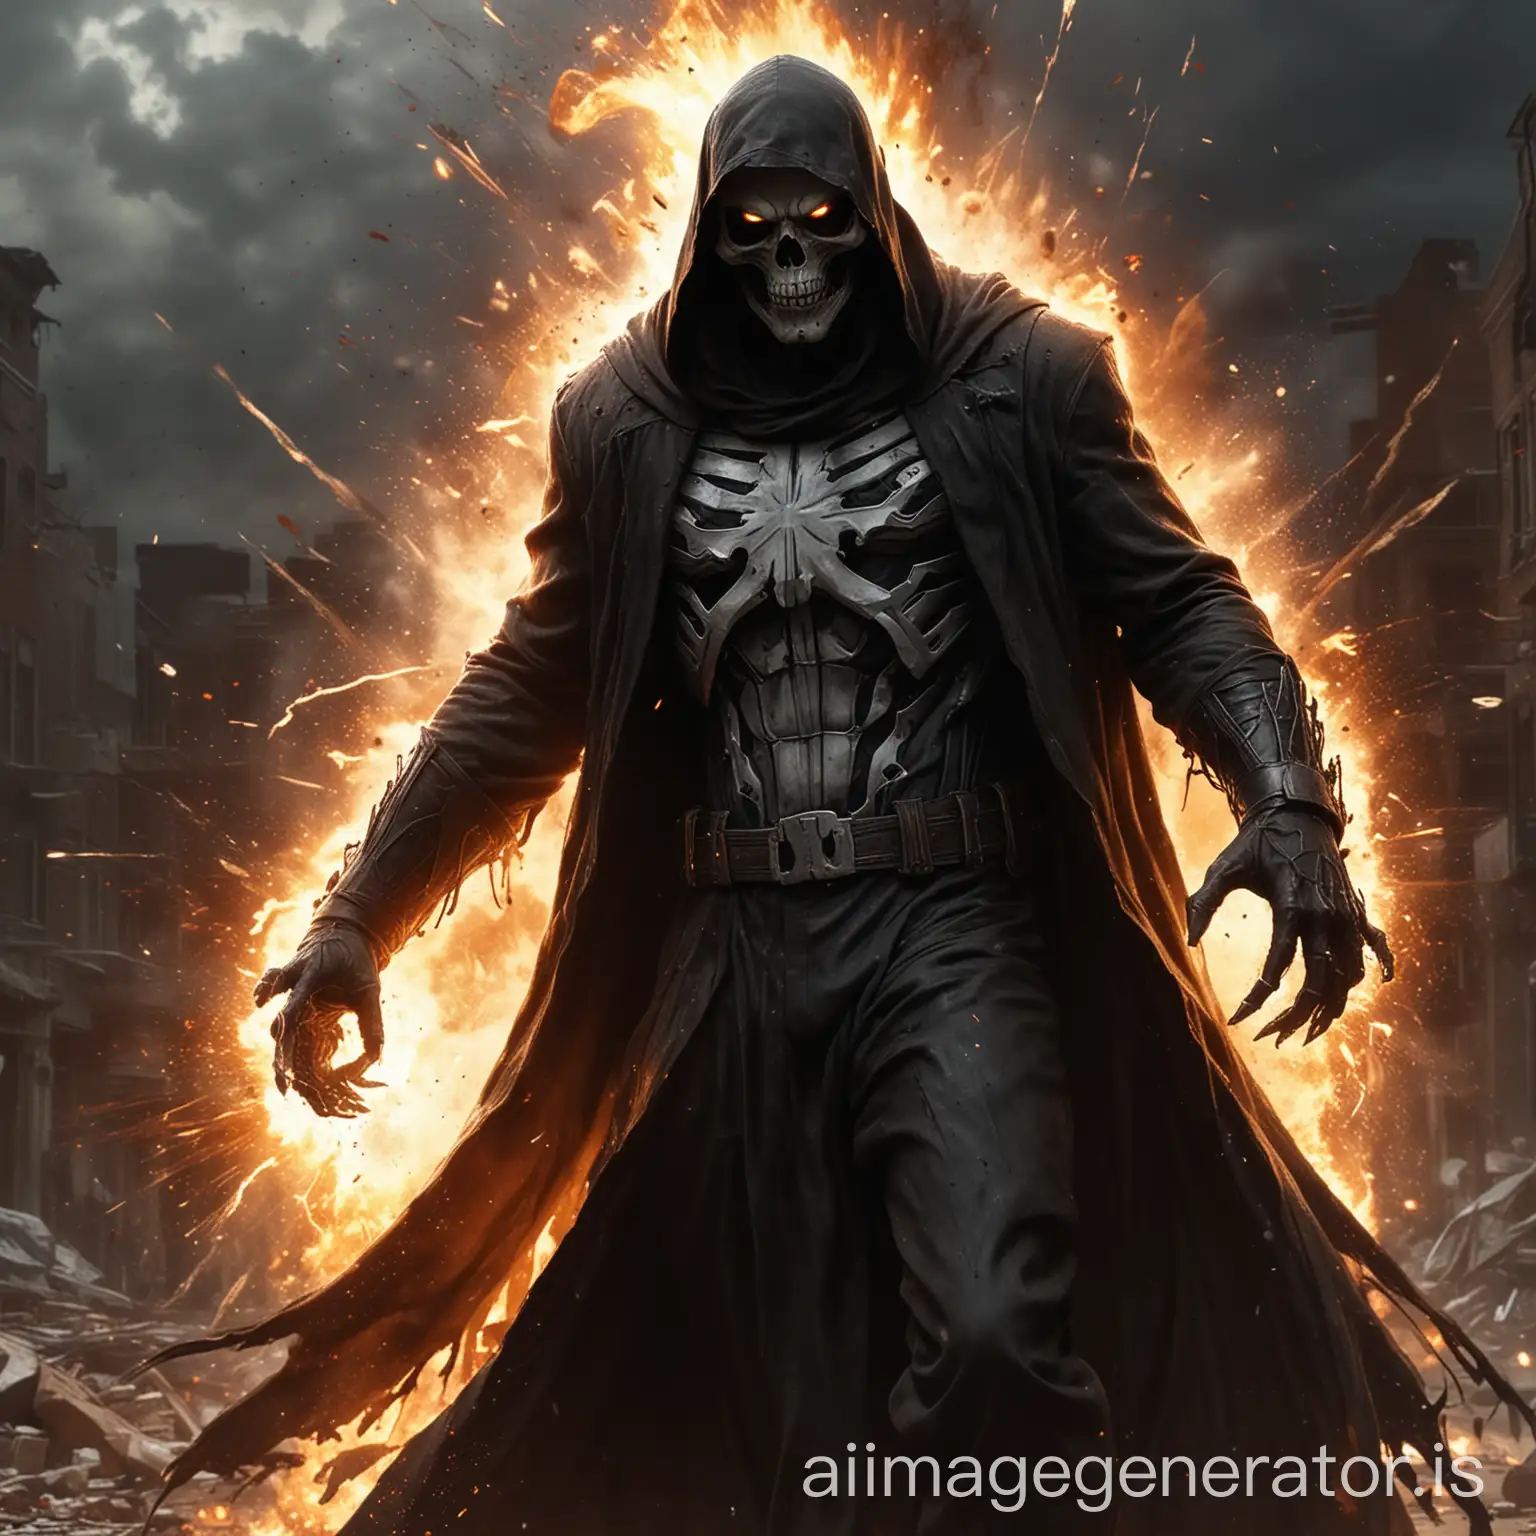 Draw the MARVEL character GRIM REAPER with an explosion behind him in realistic and cinematic art, but make it full size.